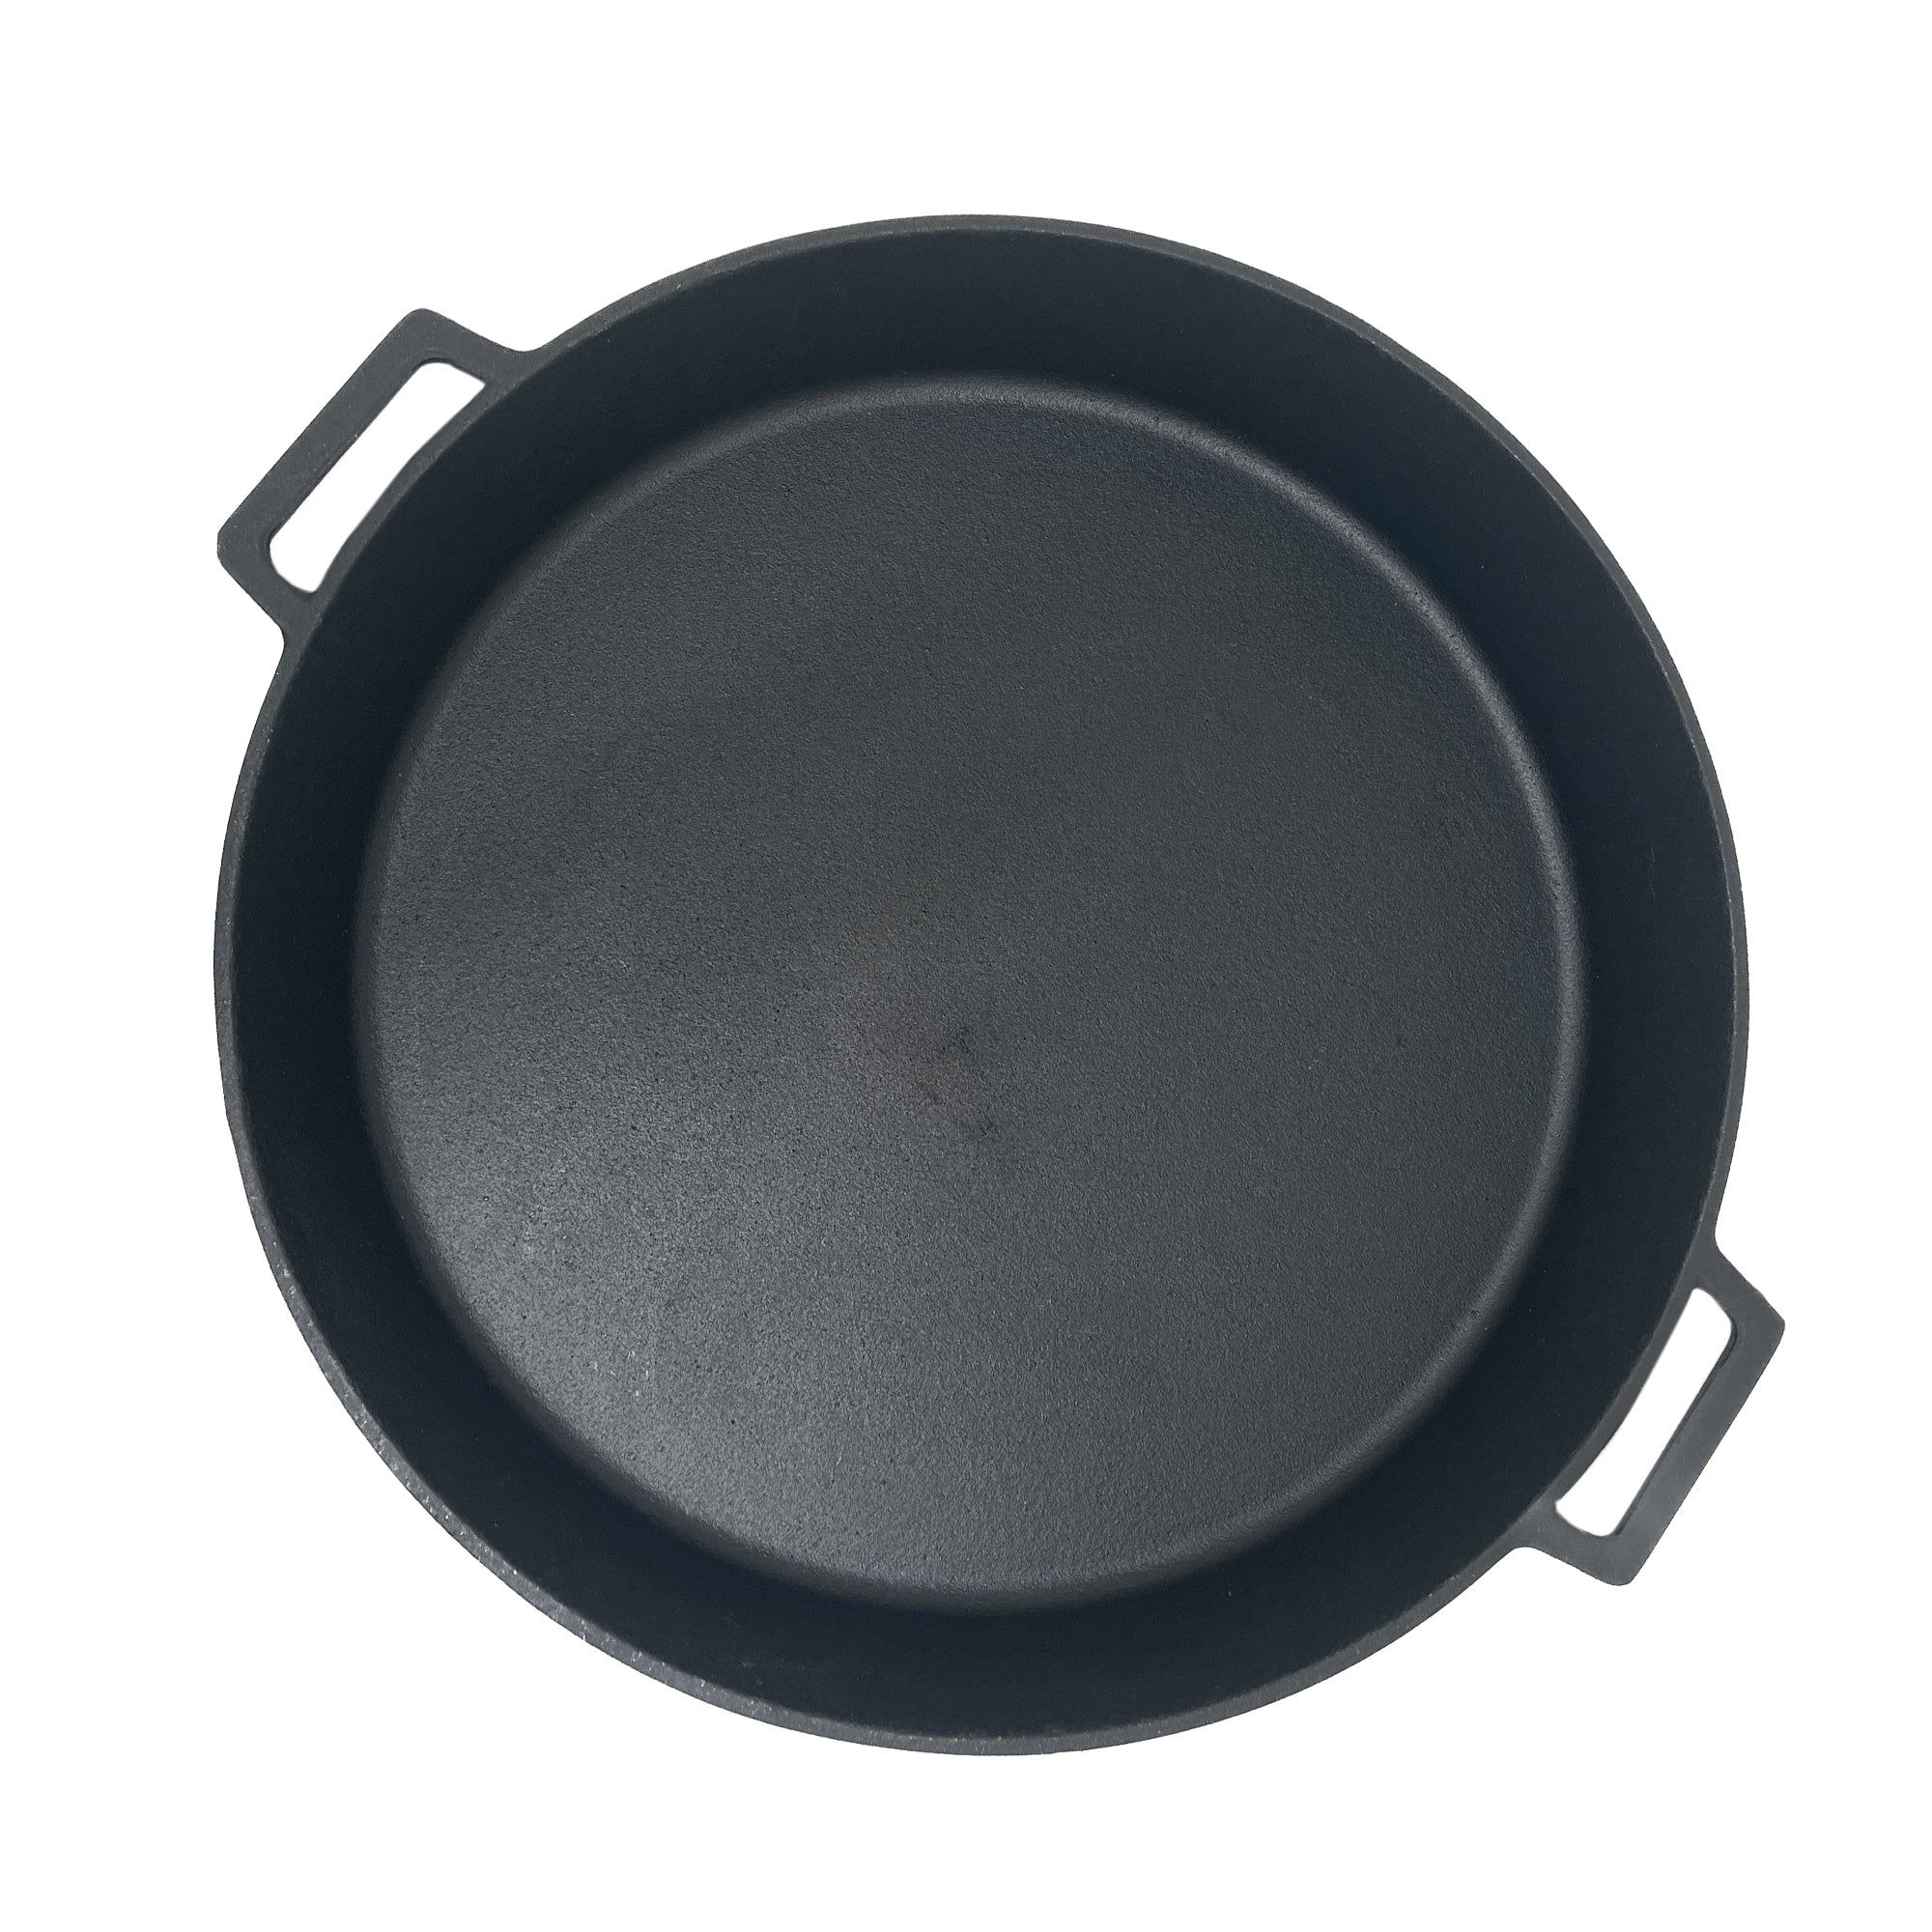 20-in Double Handled Skillet, Cast Iron Cookware